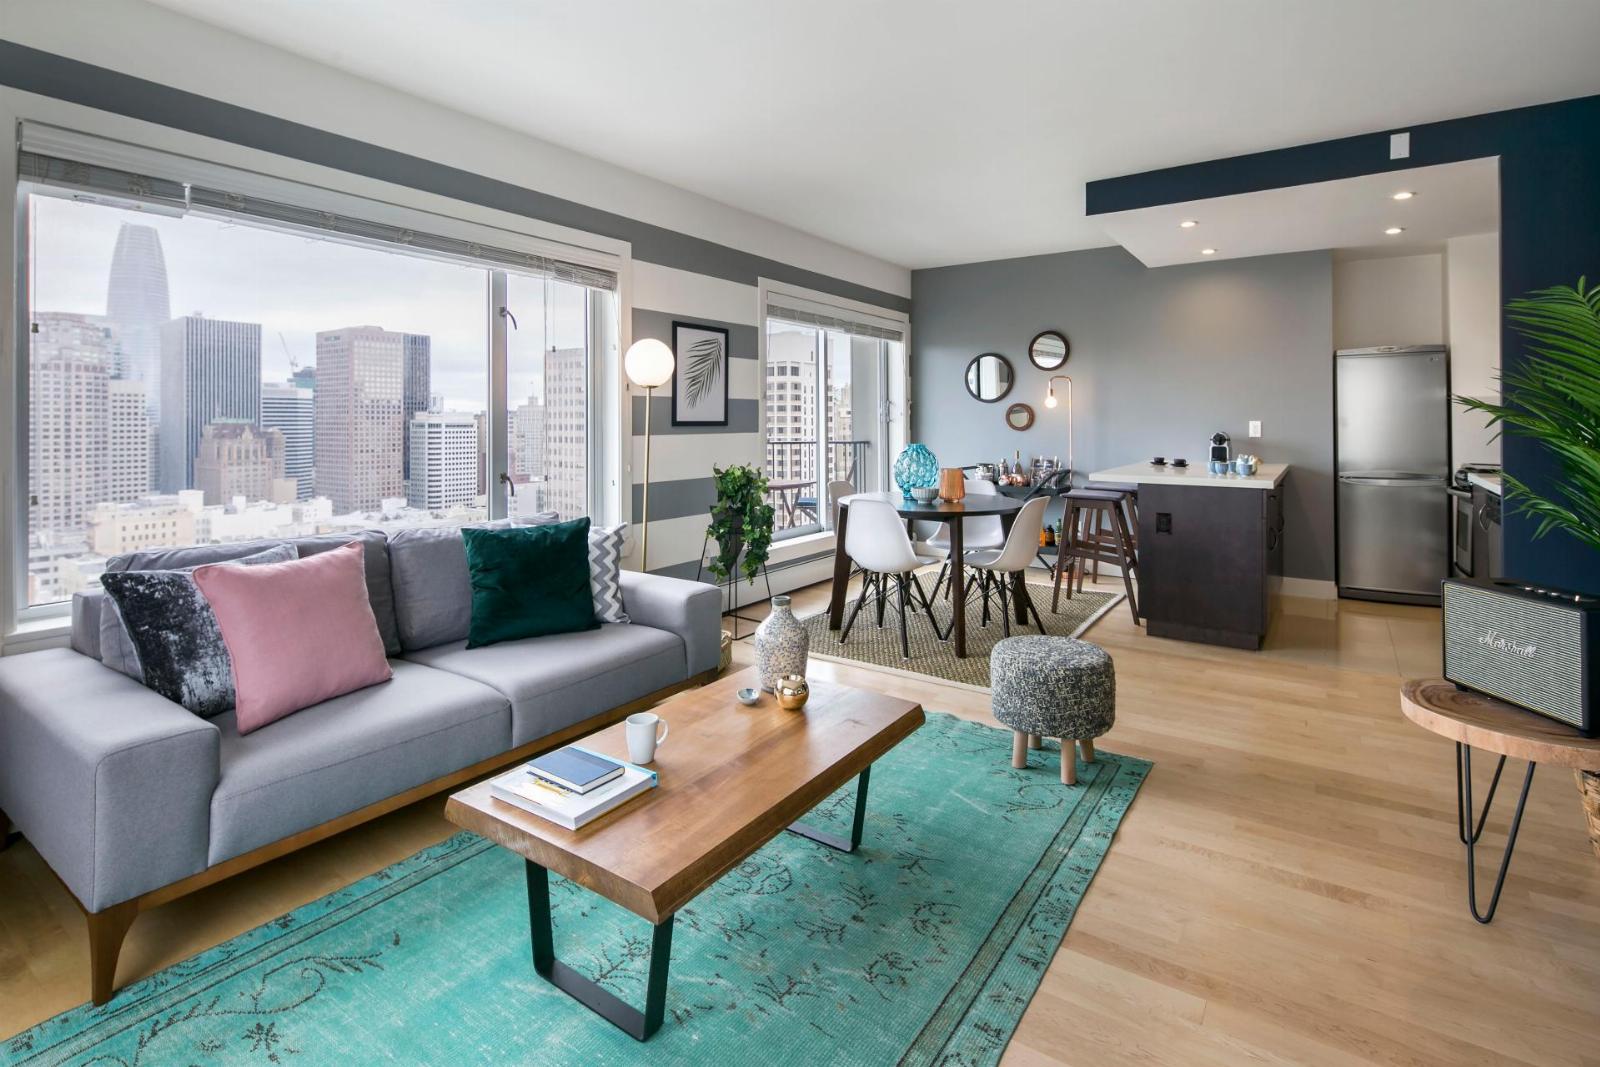 Furnished rental startup Blueground defies proptech woes with $560M in revenue, a new $45M raise